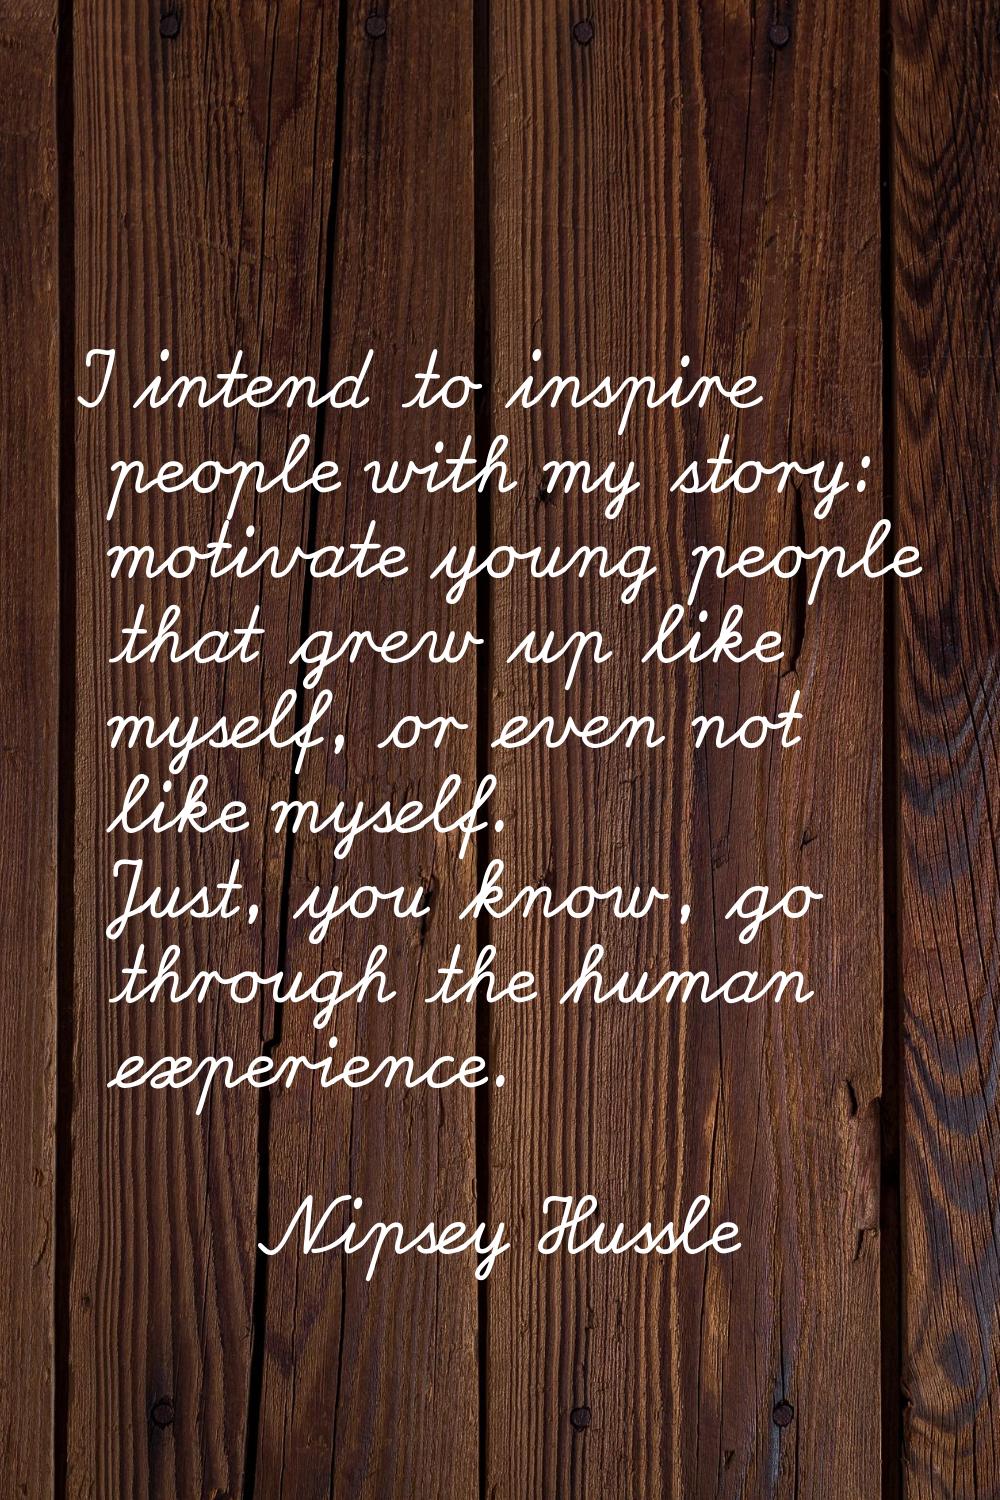 I intend to inspire people with my story: motivate young people that grew up like myself, or even n